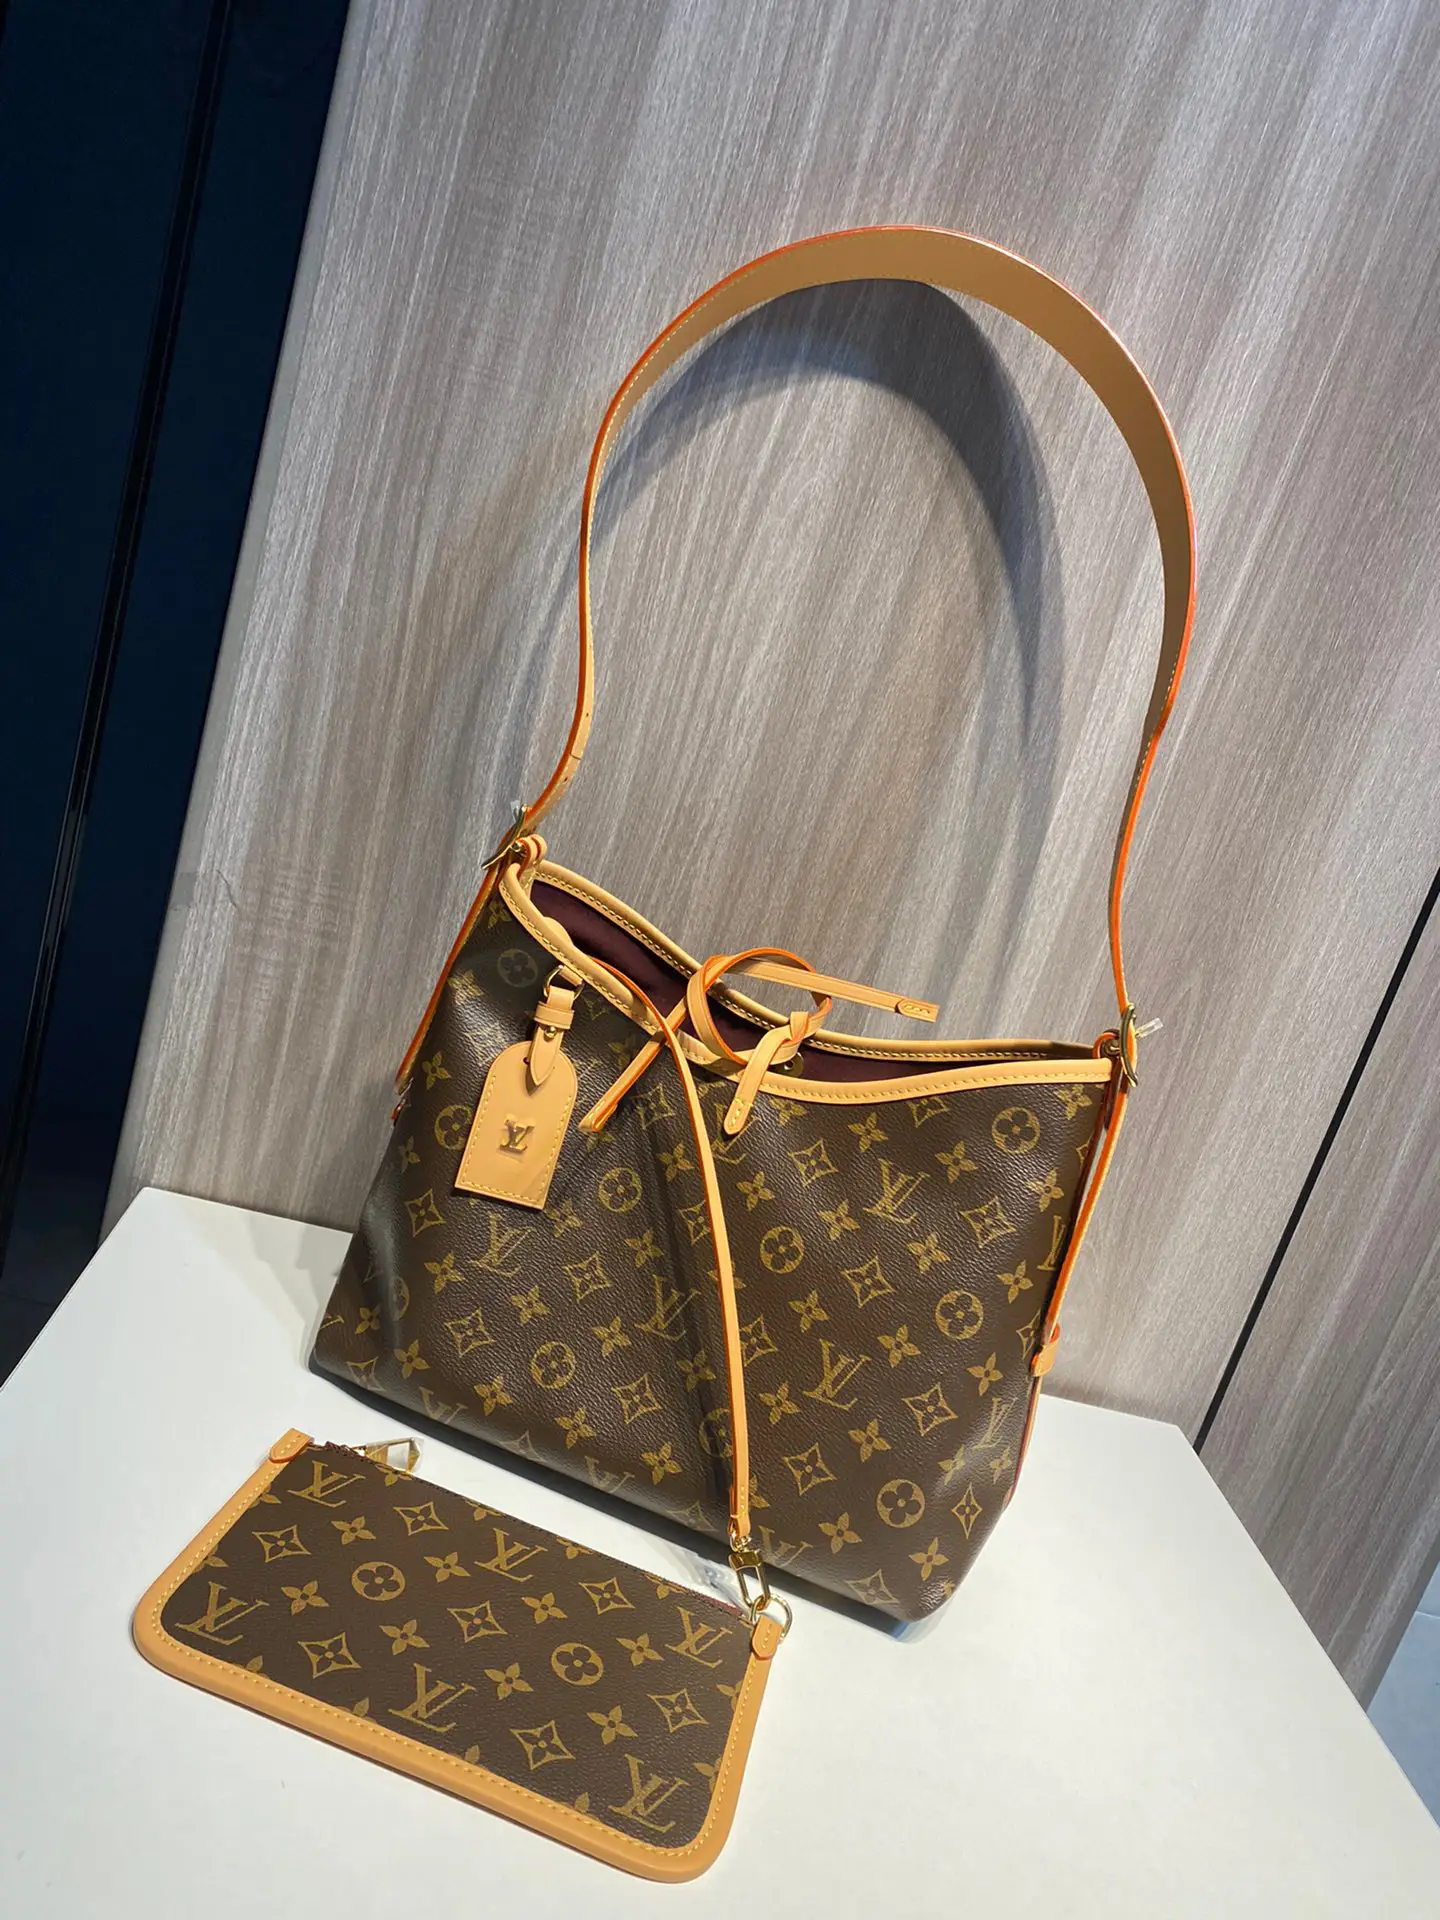 2023 #LouisVuitton hot #bag list! Let's take a look at what's new